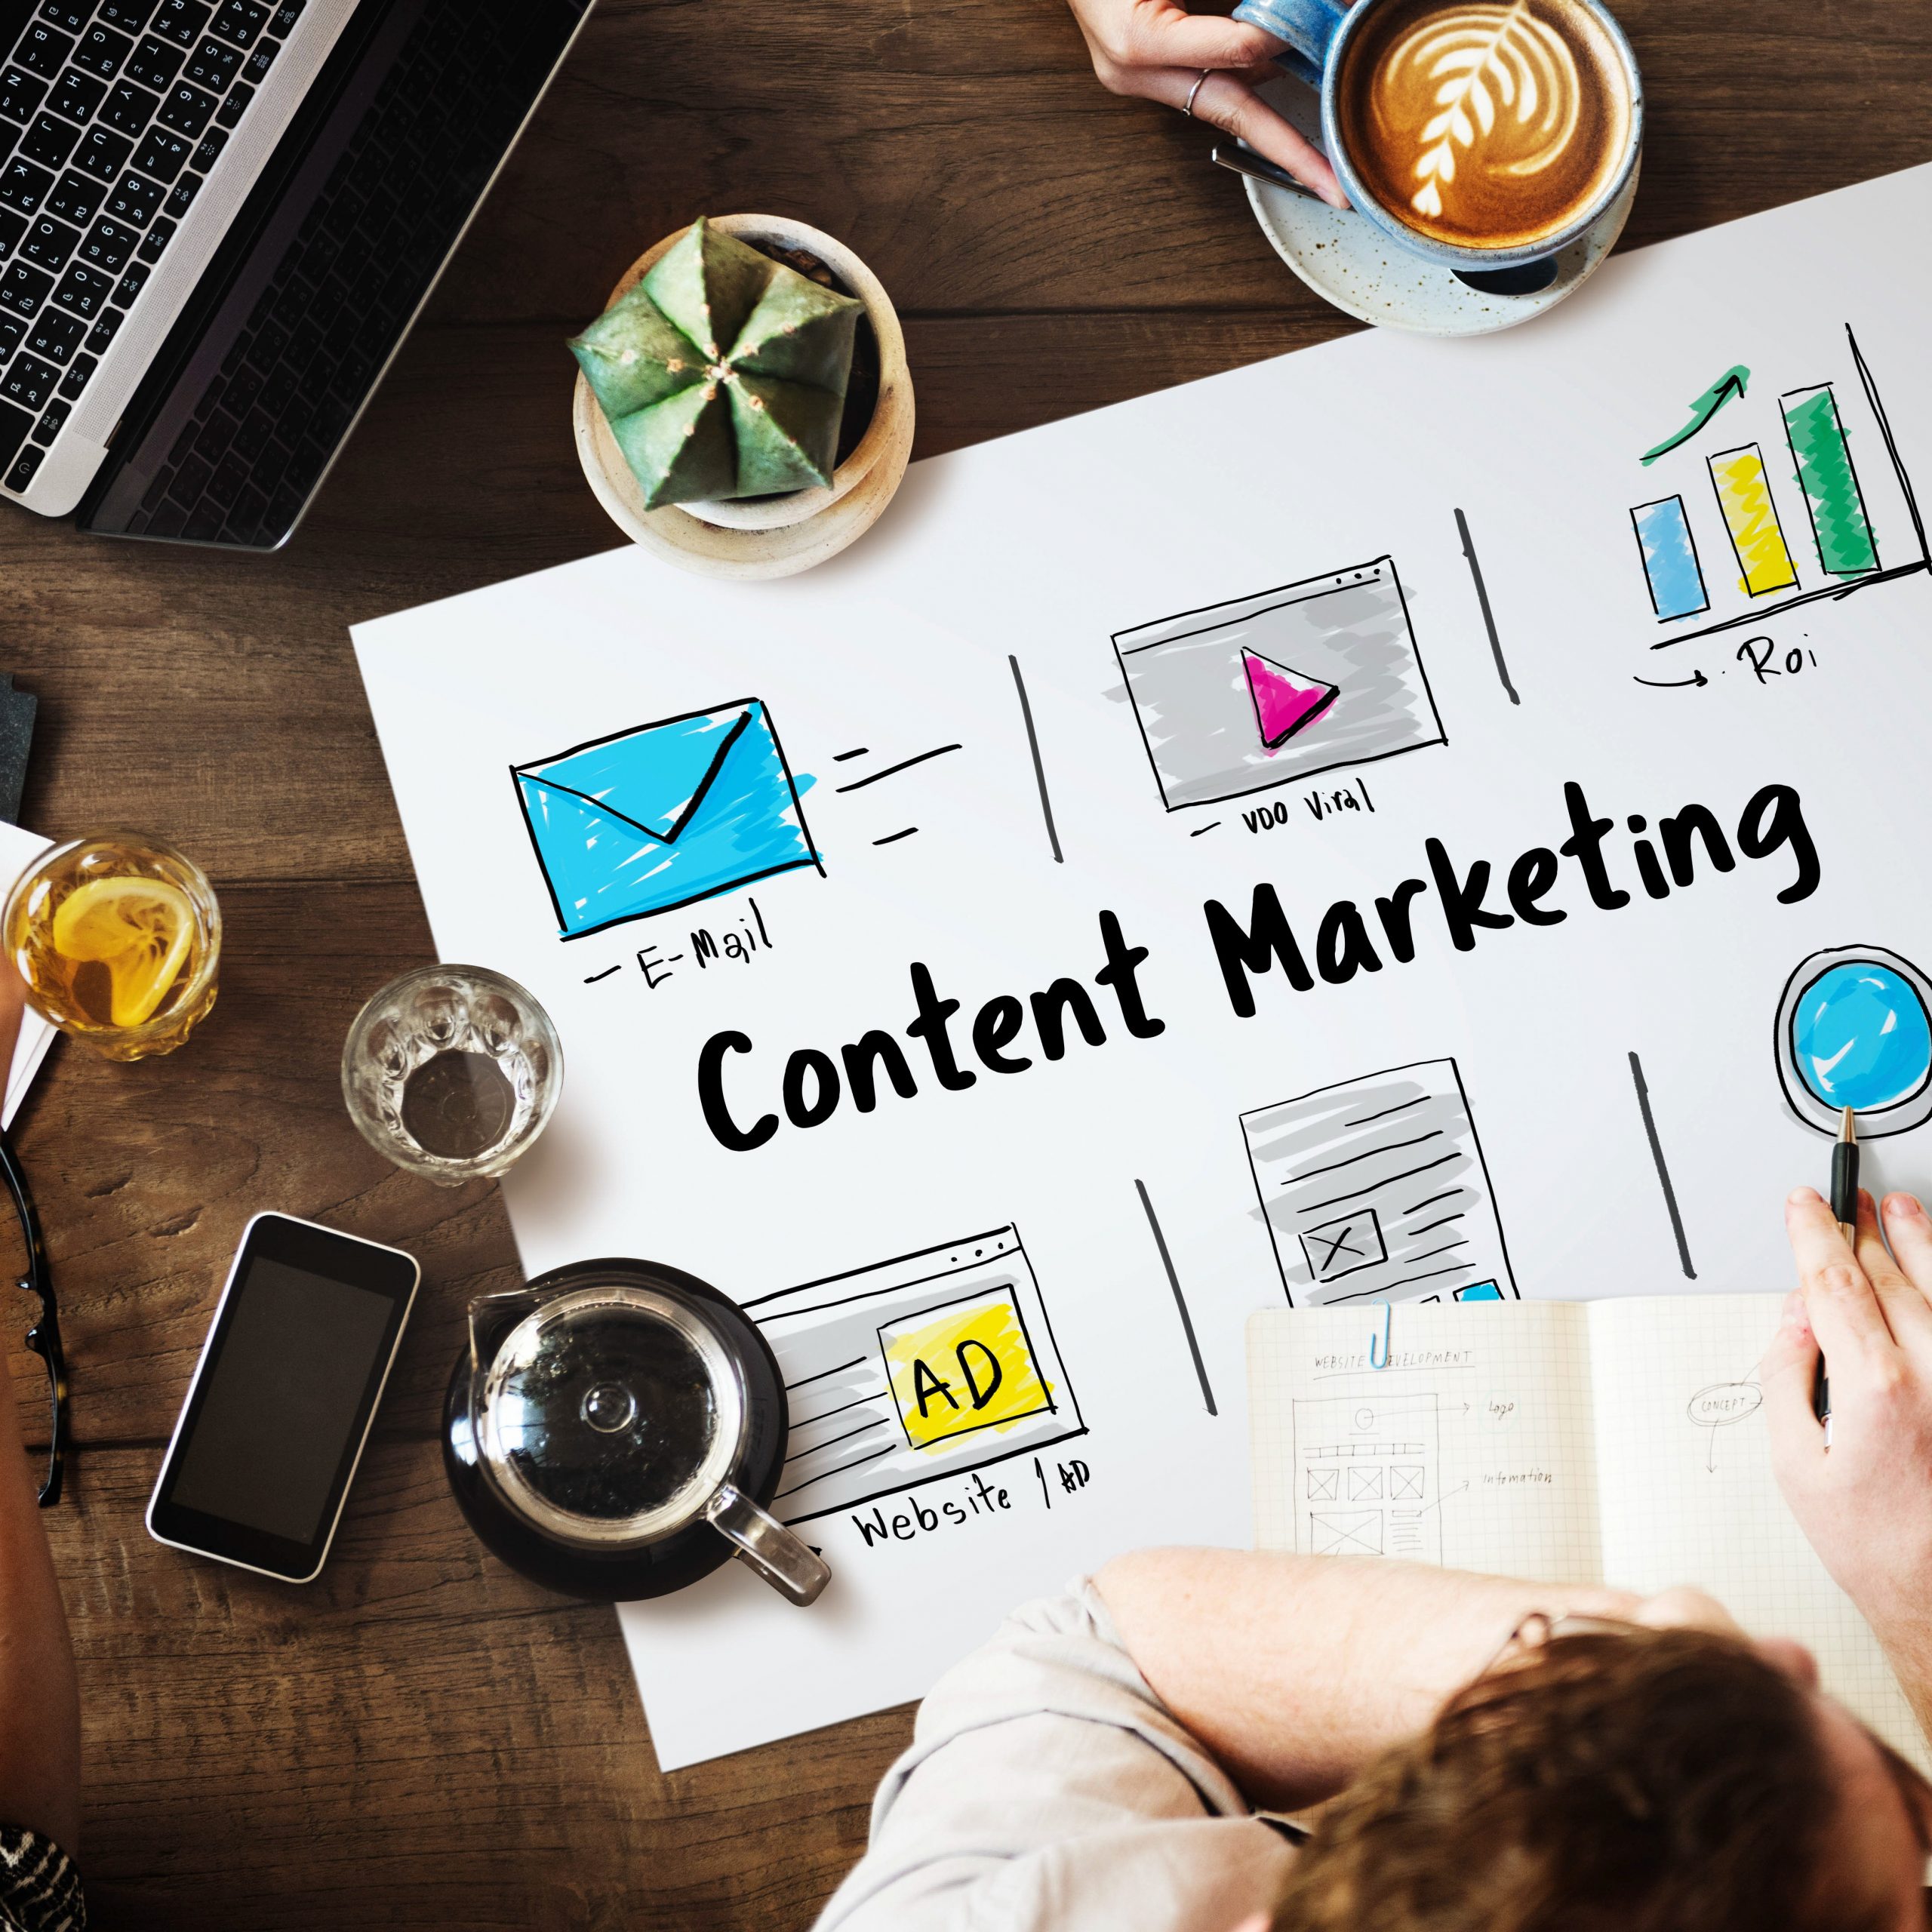 Content marketing requires patience and dedication